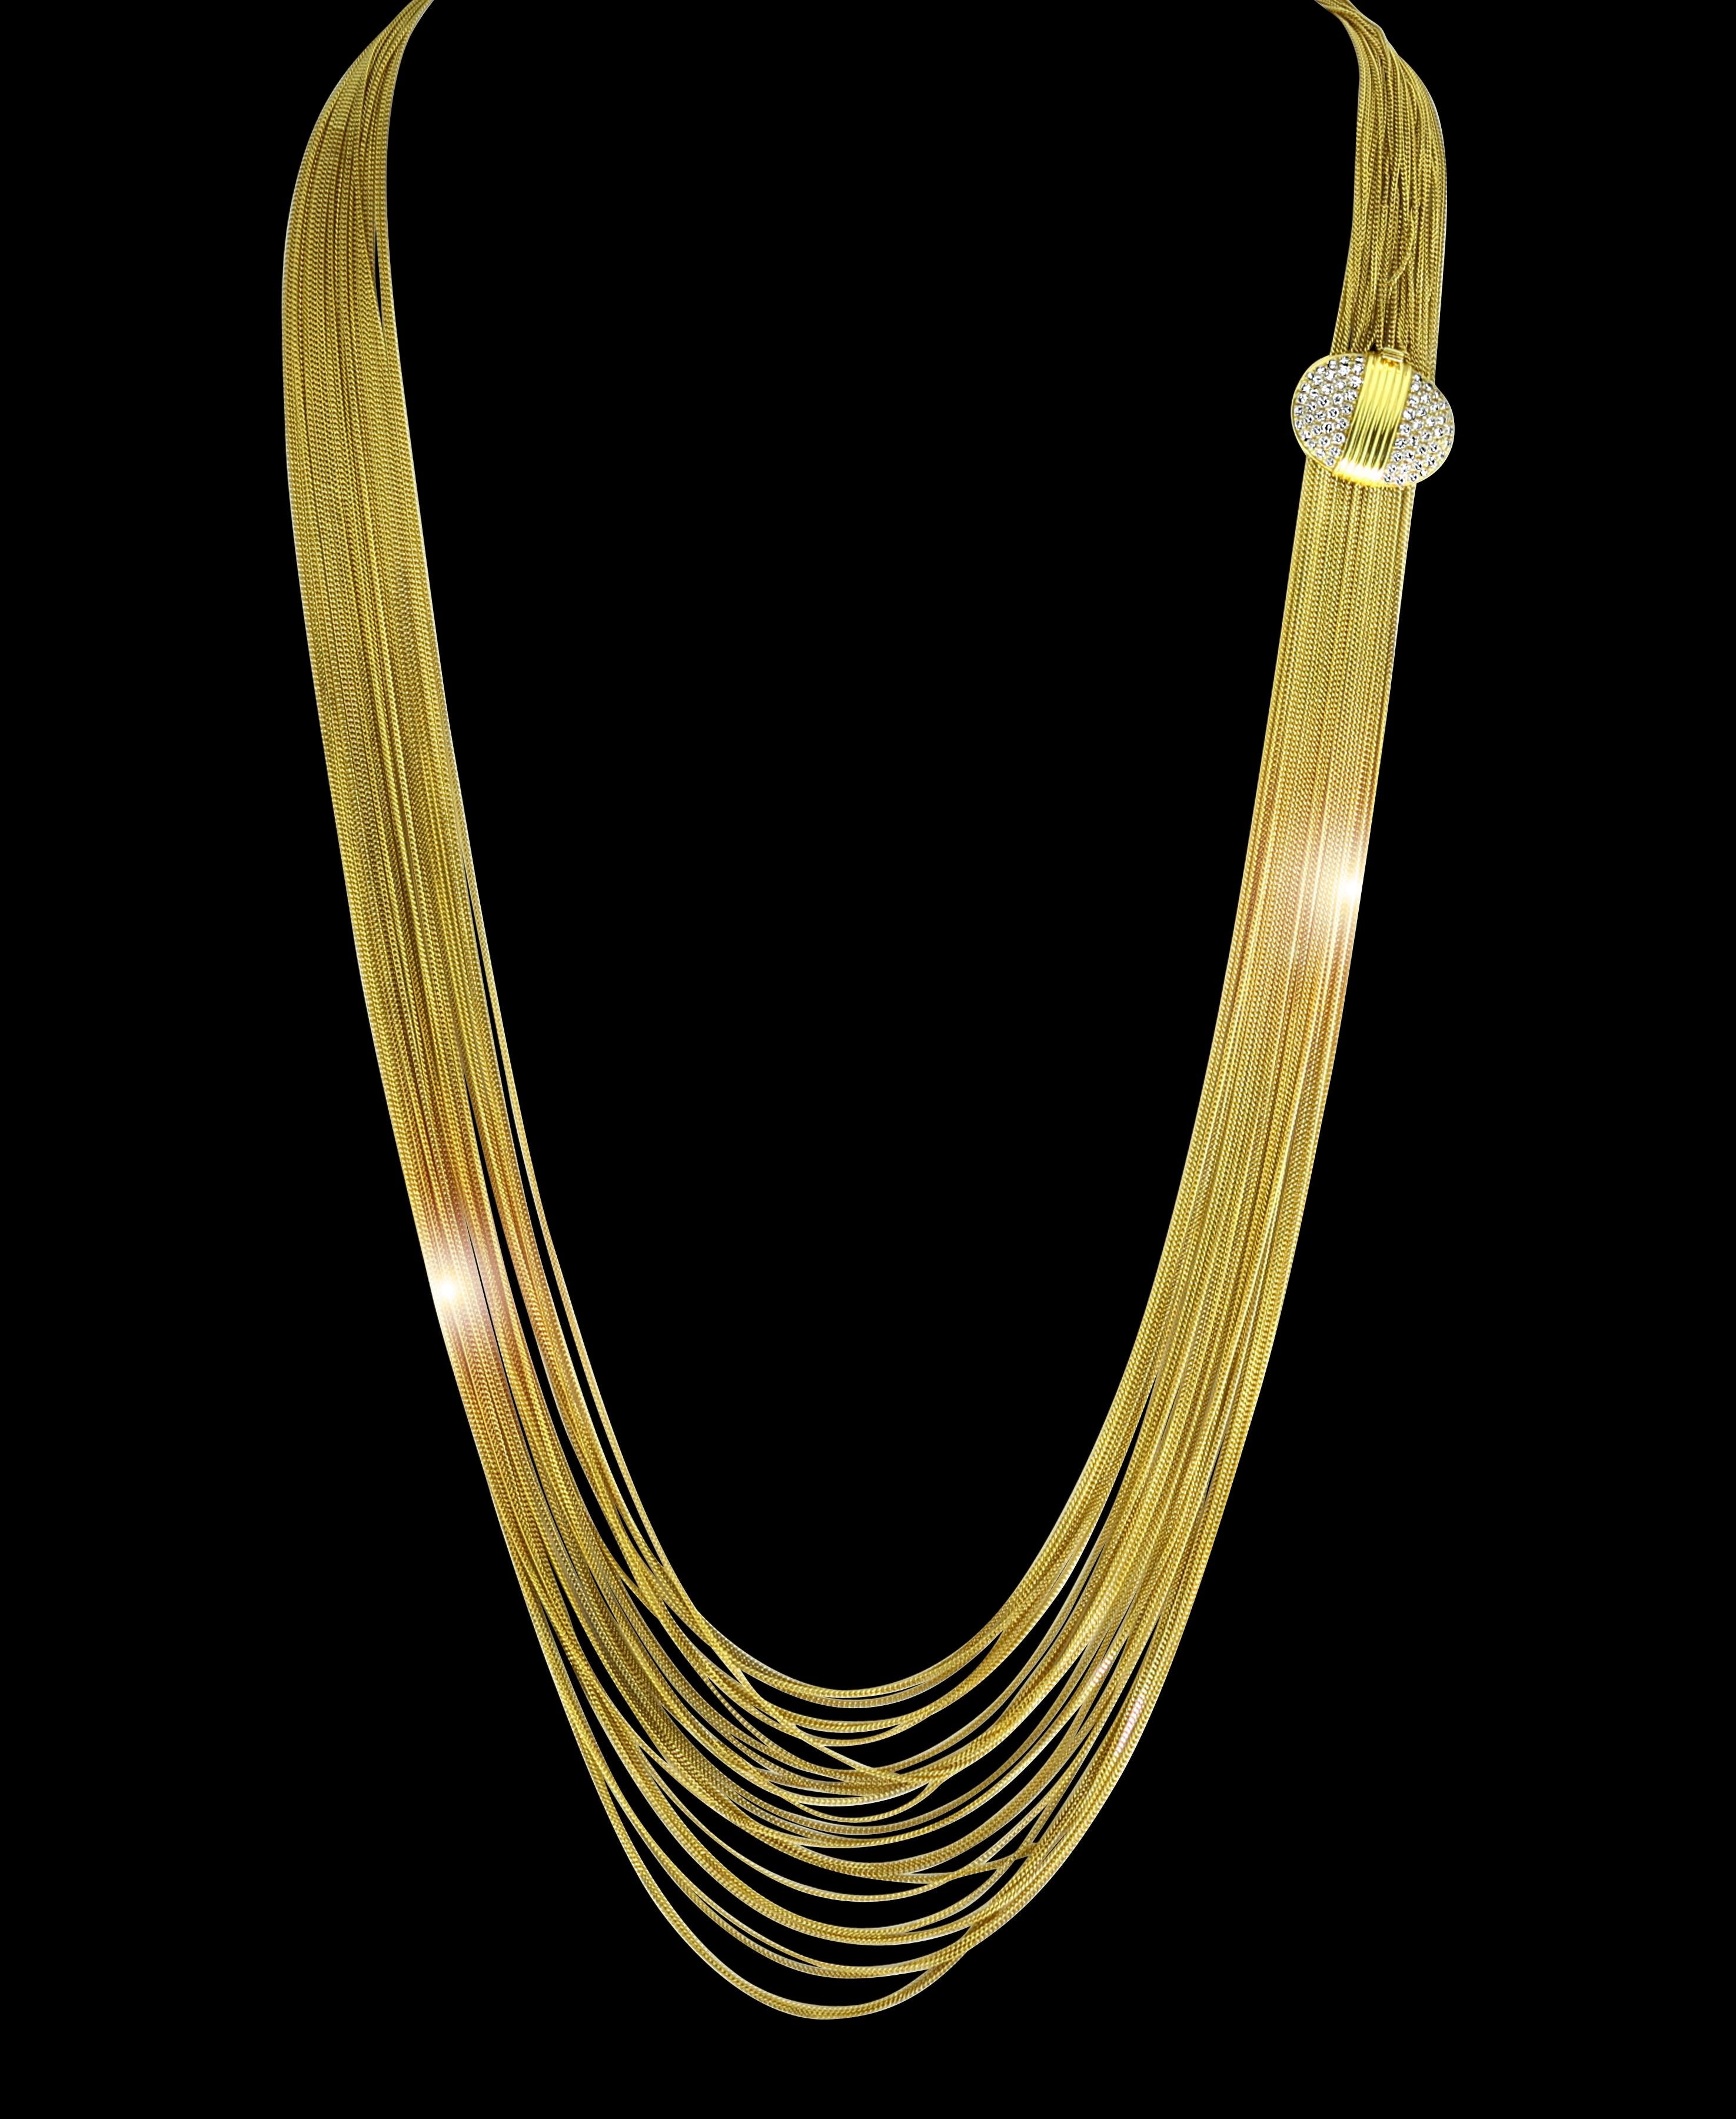 100 Gm 18 Karat Yellow Gold Antique Necklace By Designer Gucci , Opera Length 
Graduating lariat with 27 multi strand gold chains, All connected with a clasp full of diamonds.
Diamonds : approximately 3 ct, VS clarity and G color.
Very fine piece by